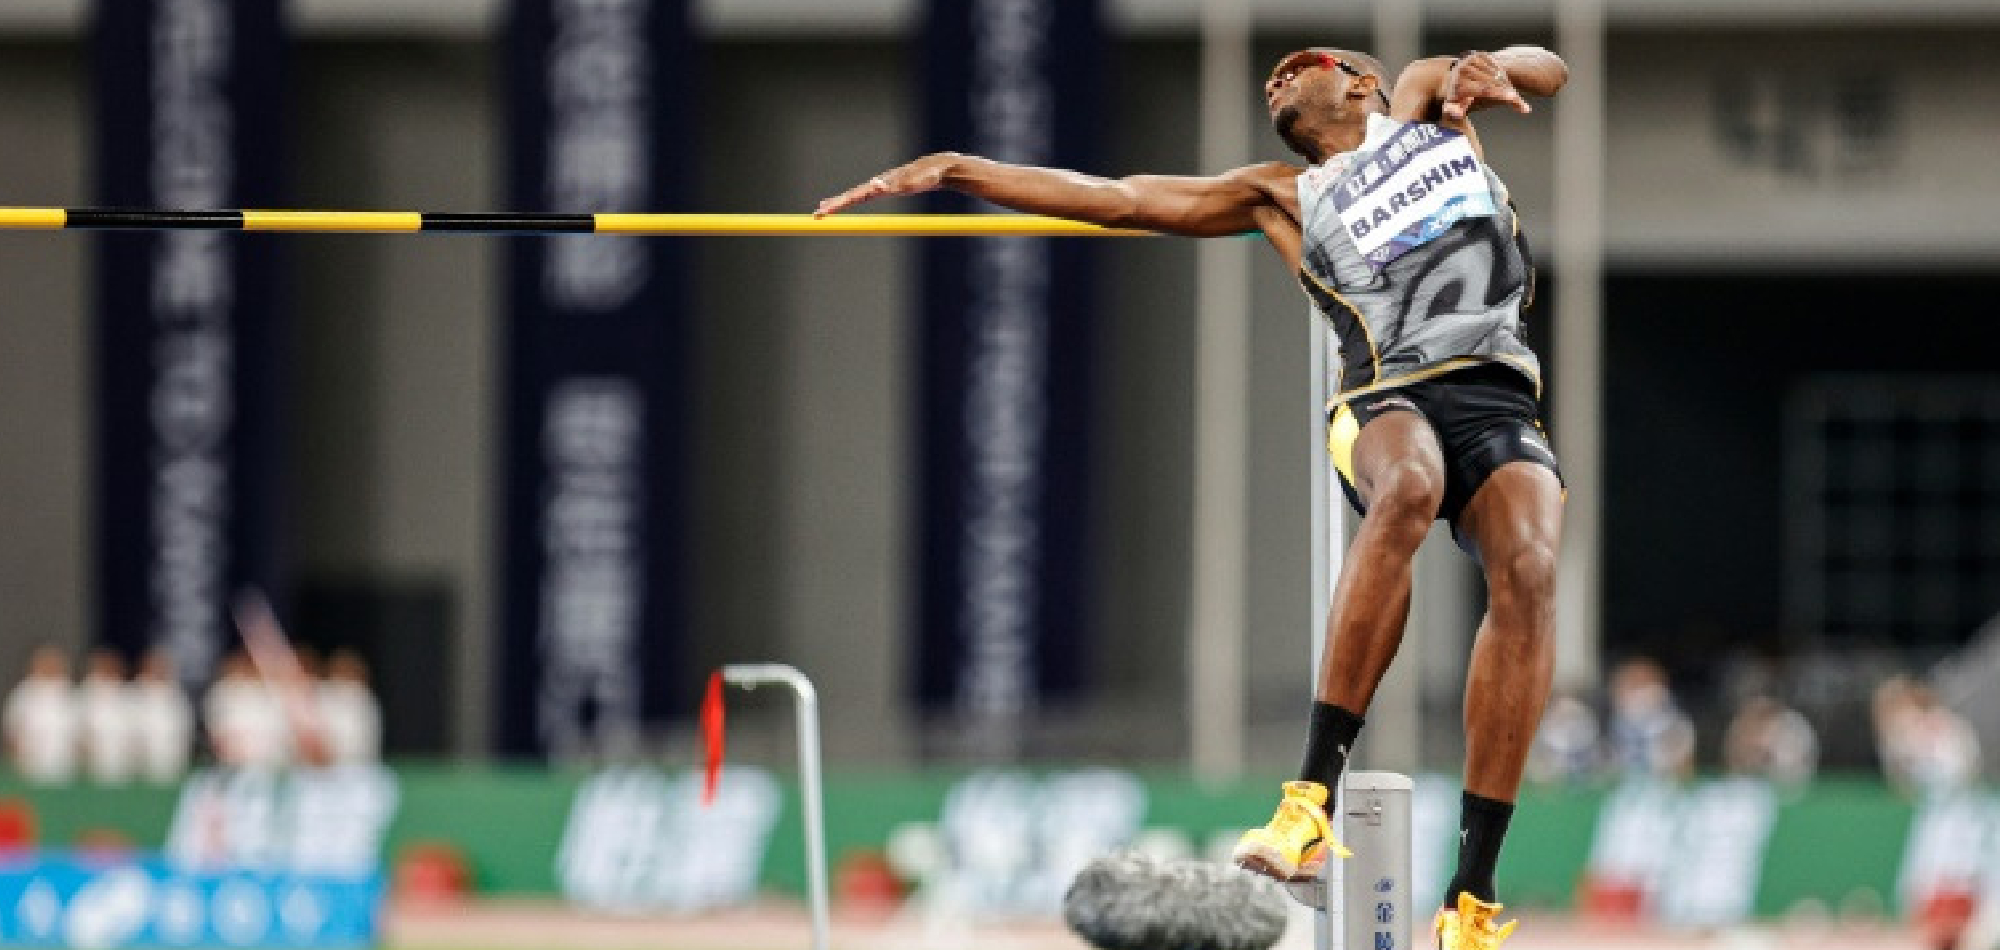 Barshim claims second position as Kerr wins in Suzhou